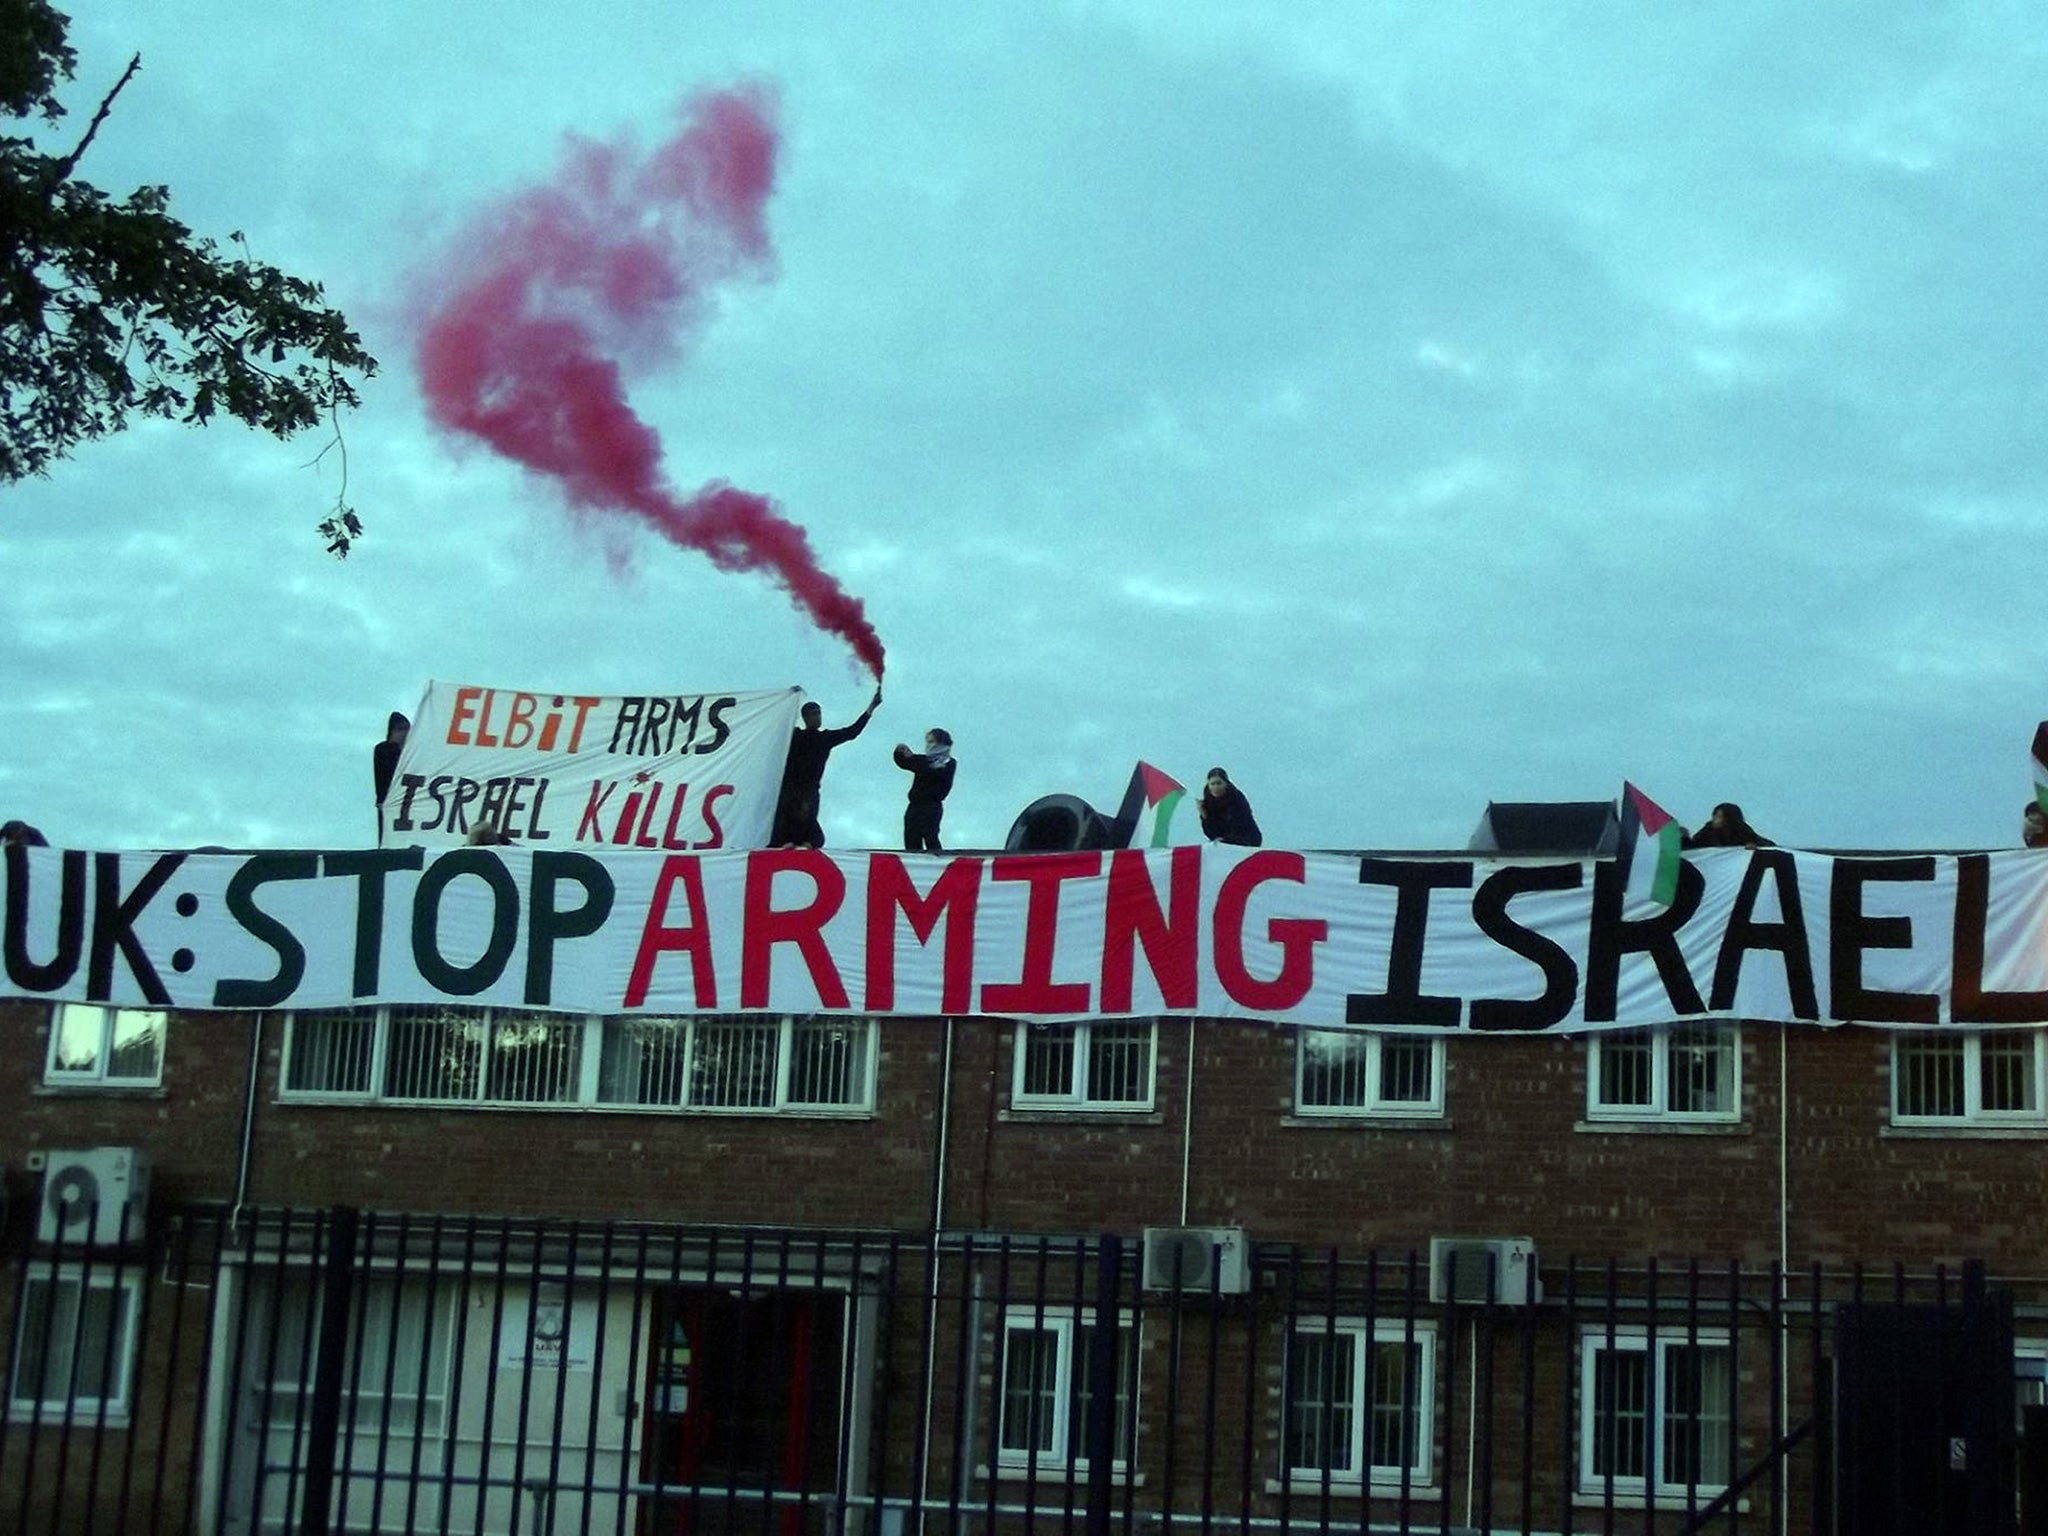 London Palestine Action protesters at UAV Engines in Lichfield, Staffordshire, last August